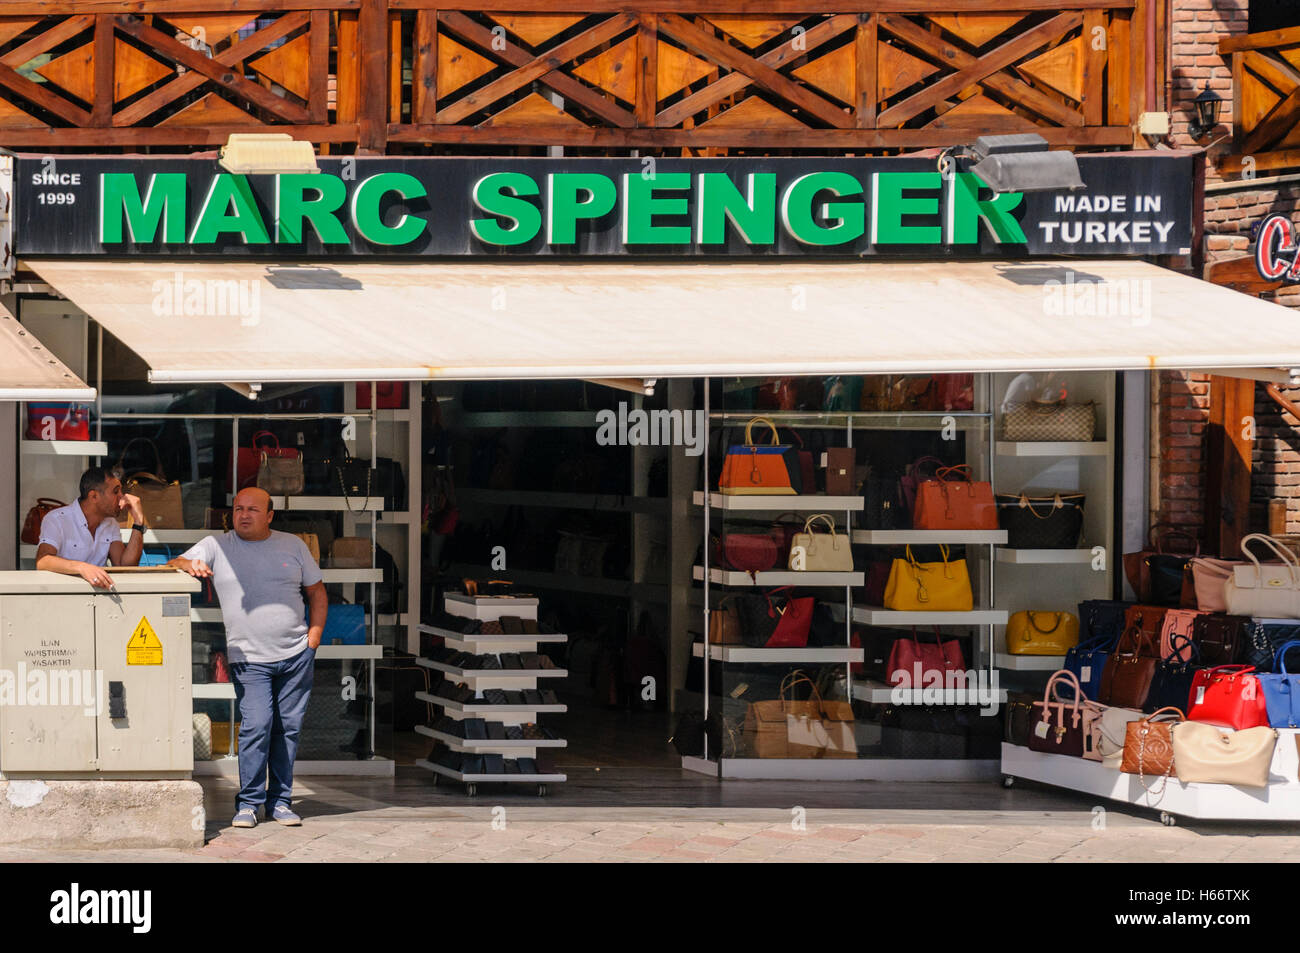 Shop in Turkey called 'Marc Spenger' (Marks and Spencer) selling counterfeit clothing, sportswear and watches Stock Photo